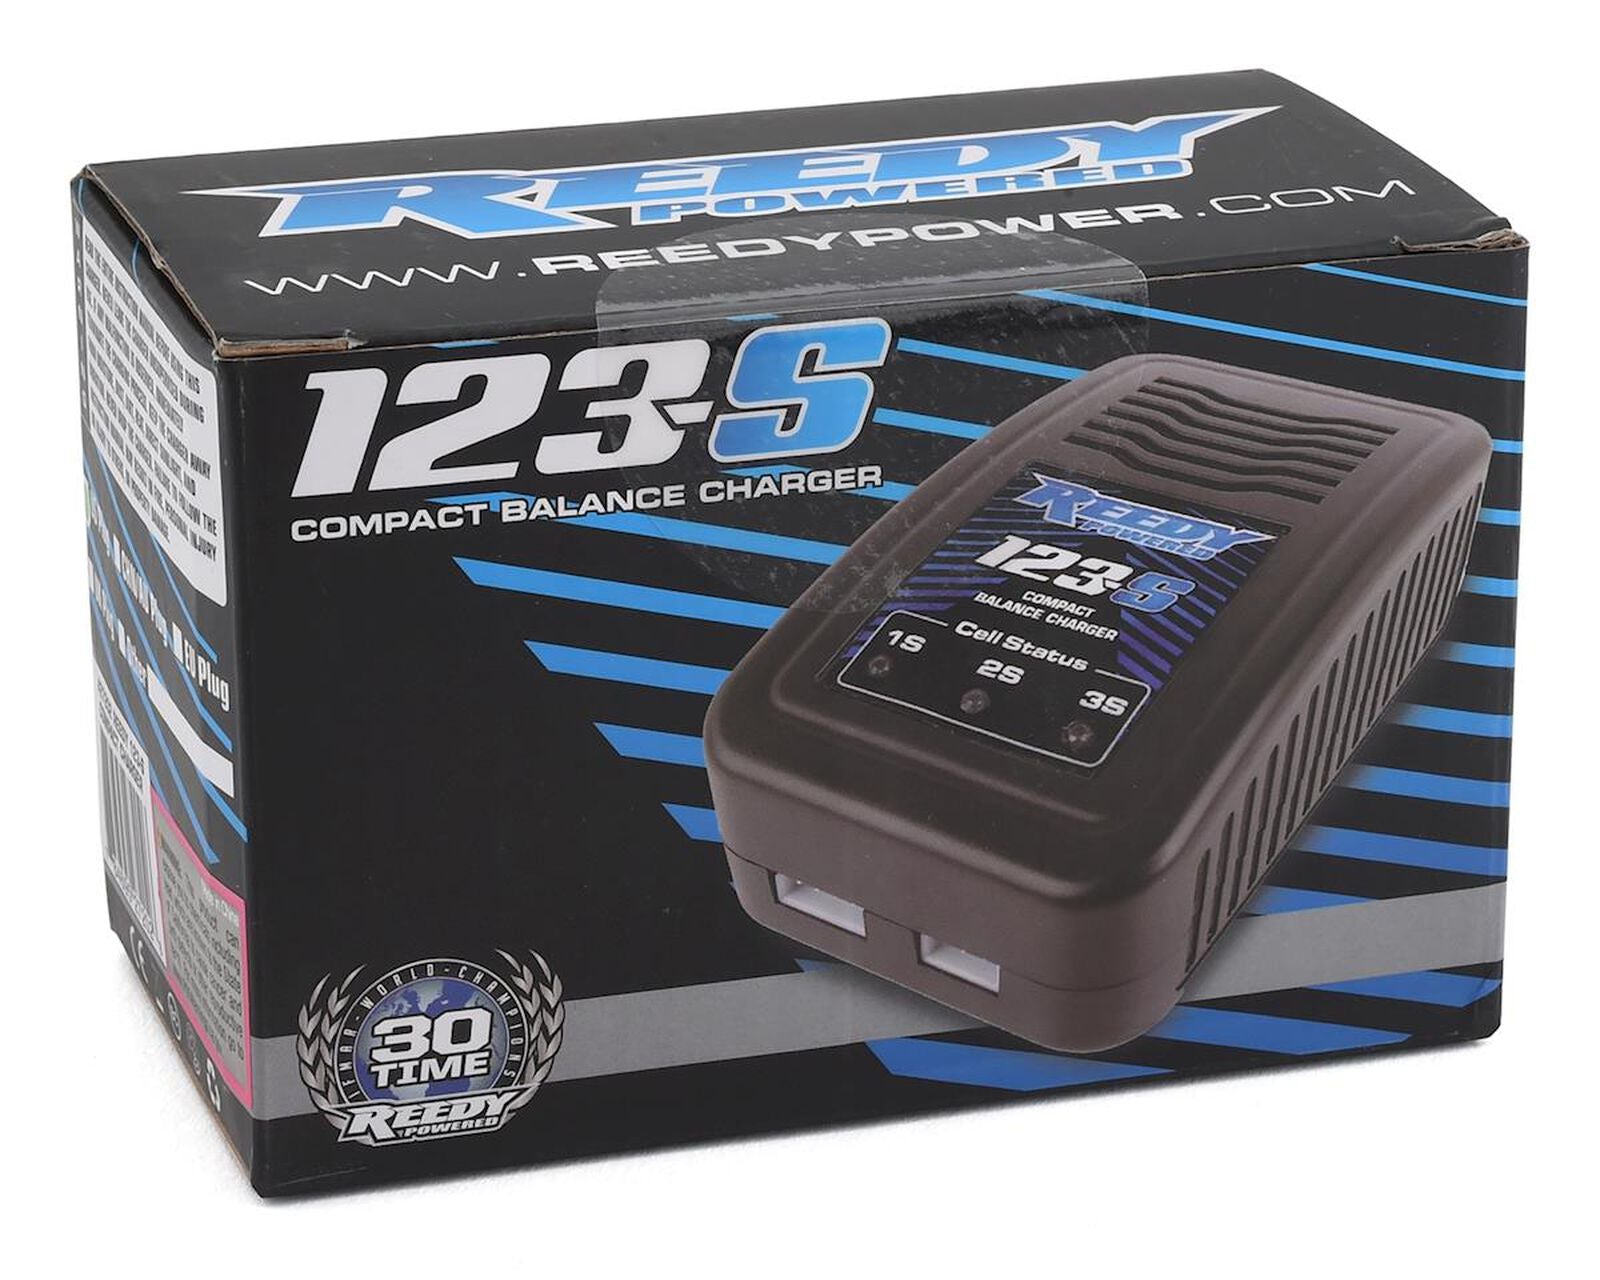 123-S Compact Single Channel AC Balance Charger (US) (2-3S/1.2A/15W)